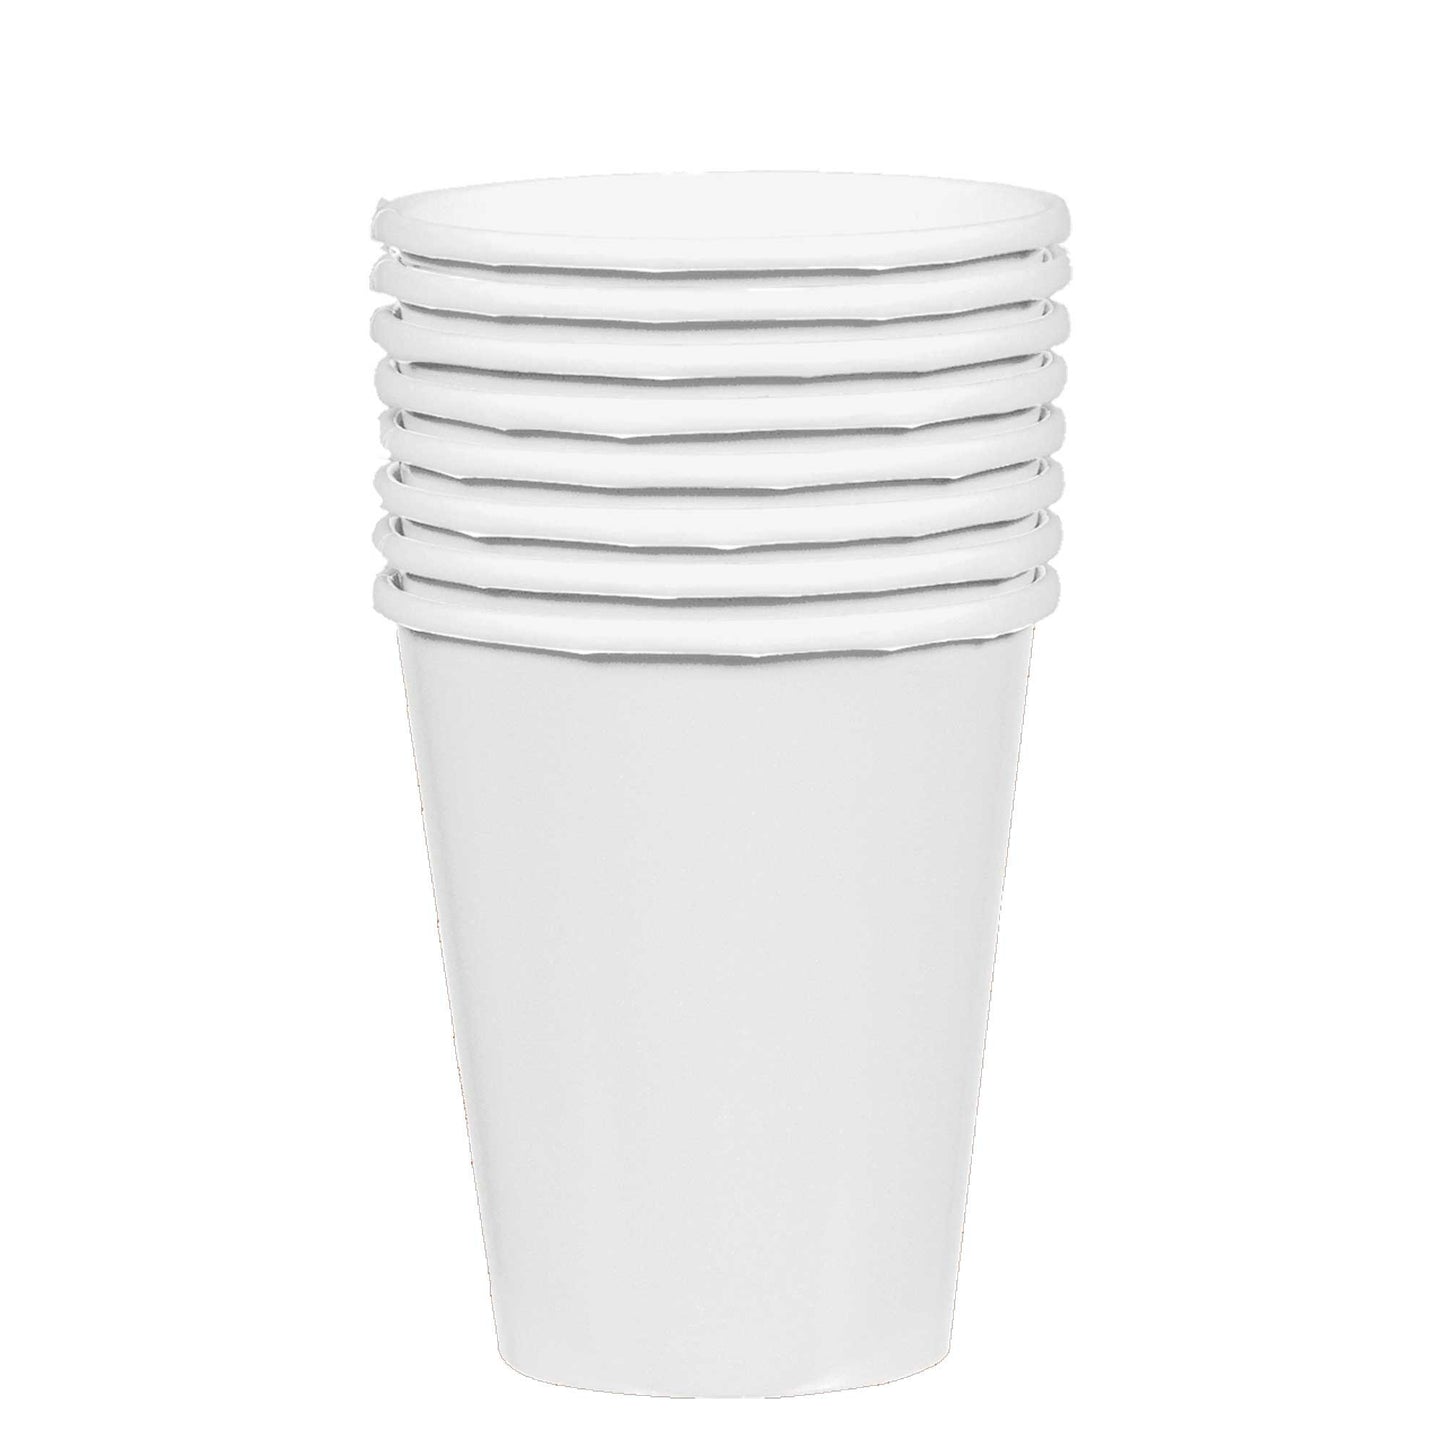 354ml Paper Cups 20 Pack- Frosty White NPC